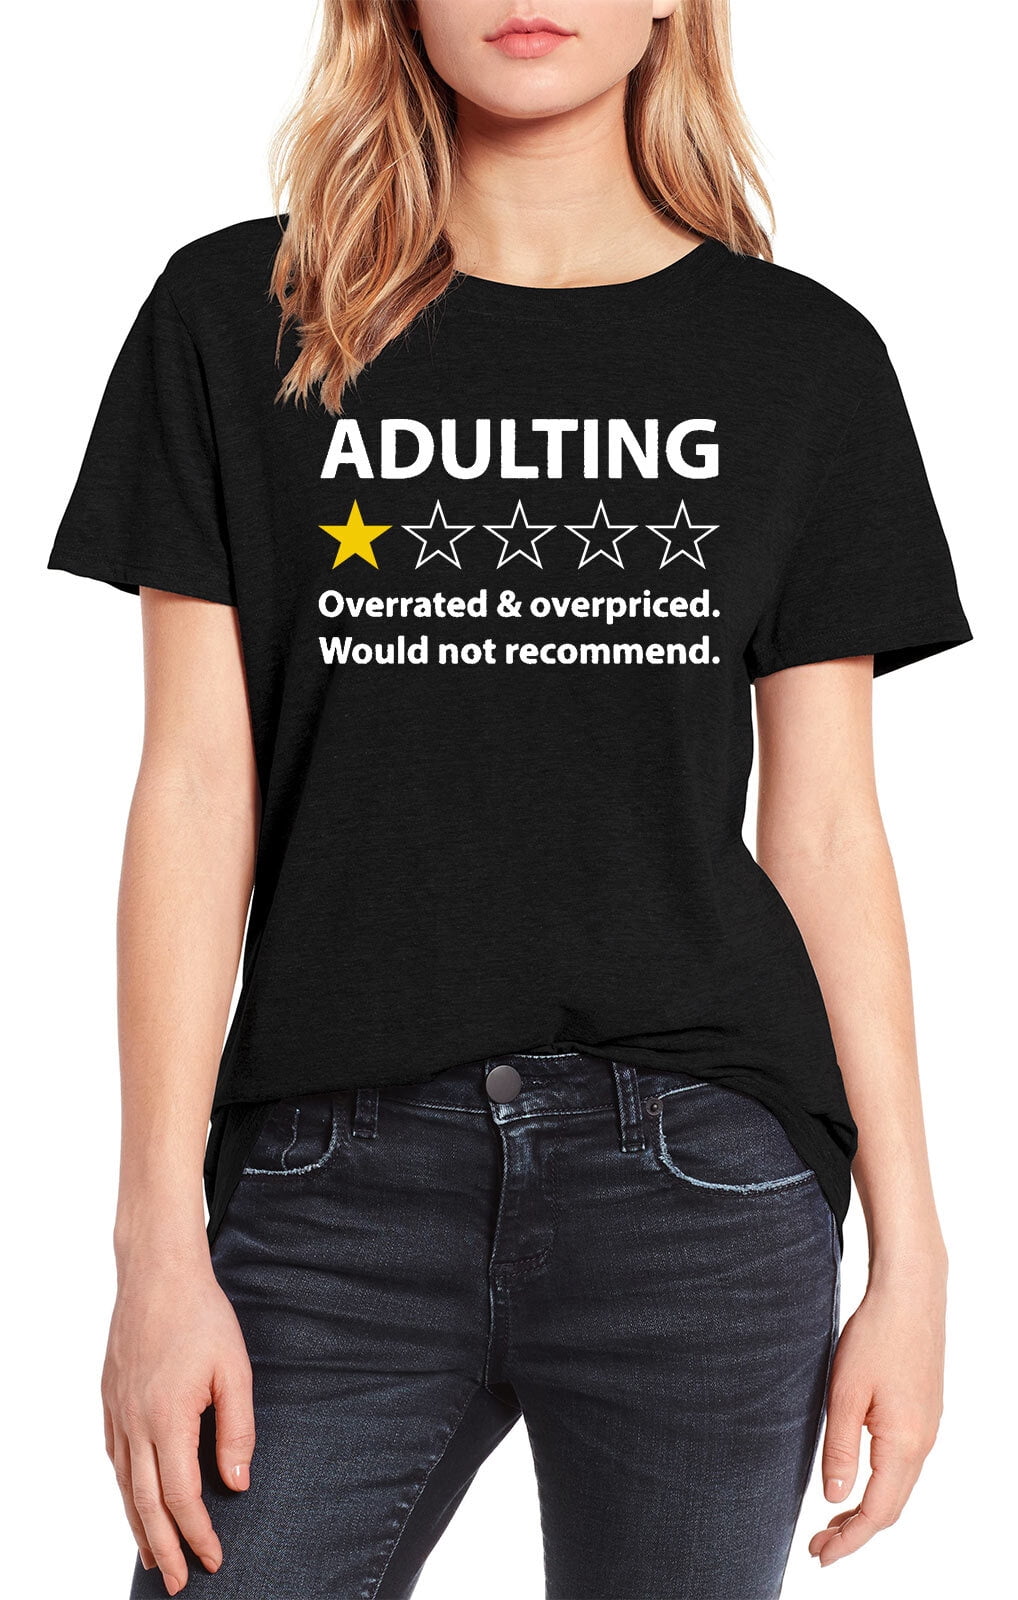 MEN'S T-Shirt Top ADULTING OVERATED Pic Printed Vinyl Gift Fun Novelty Joke Star 